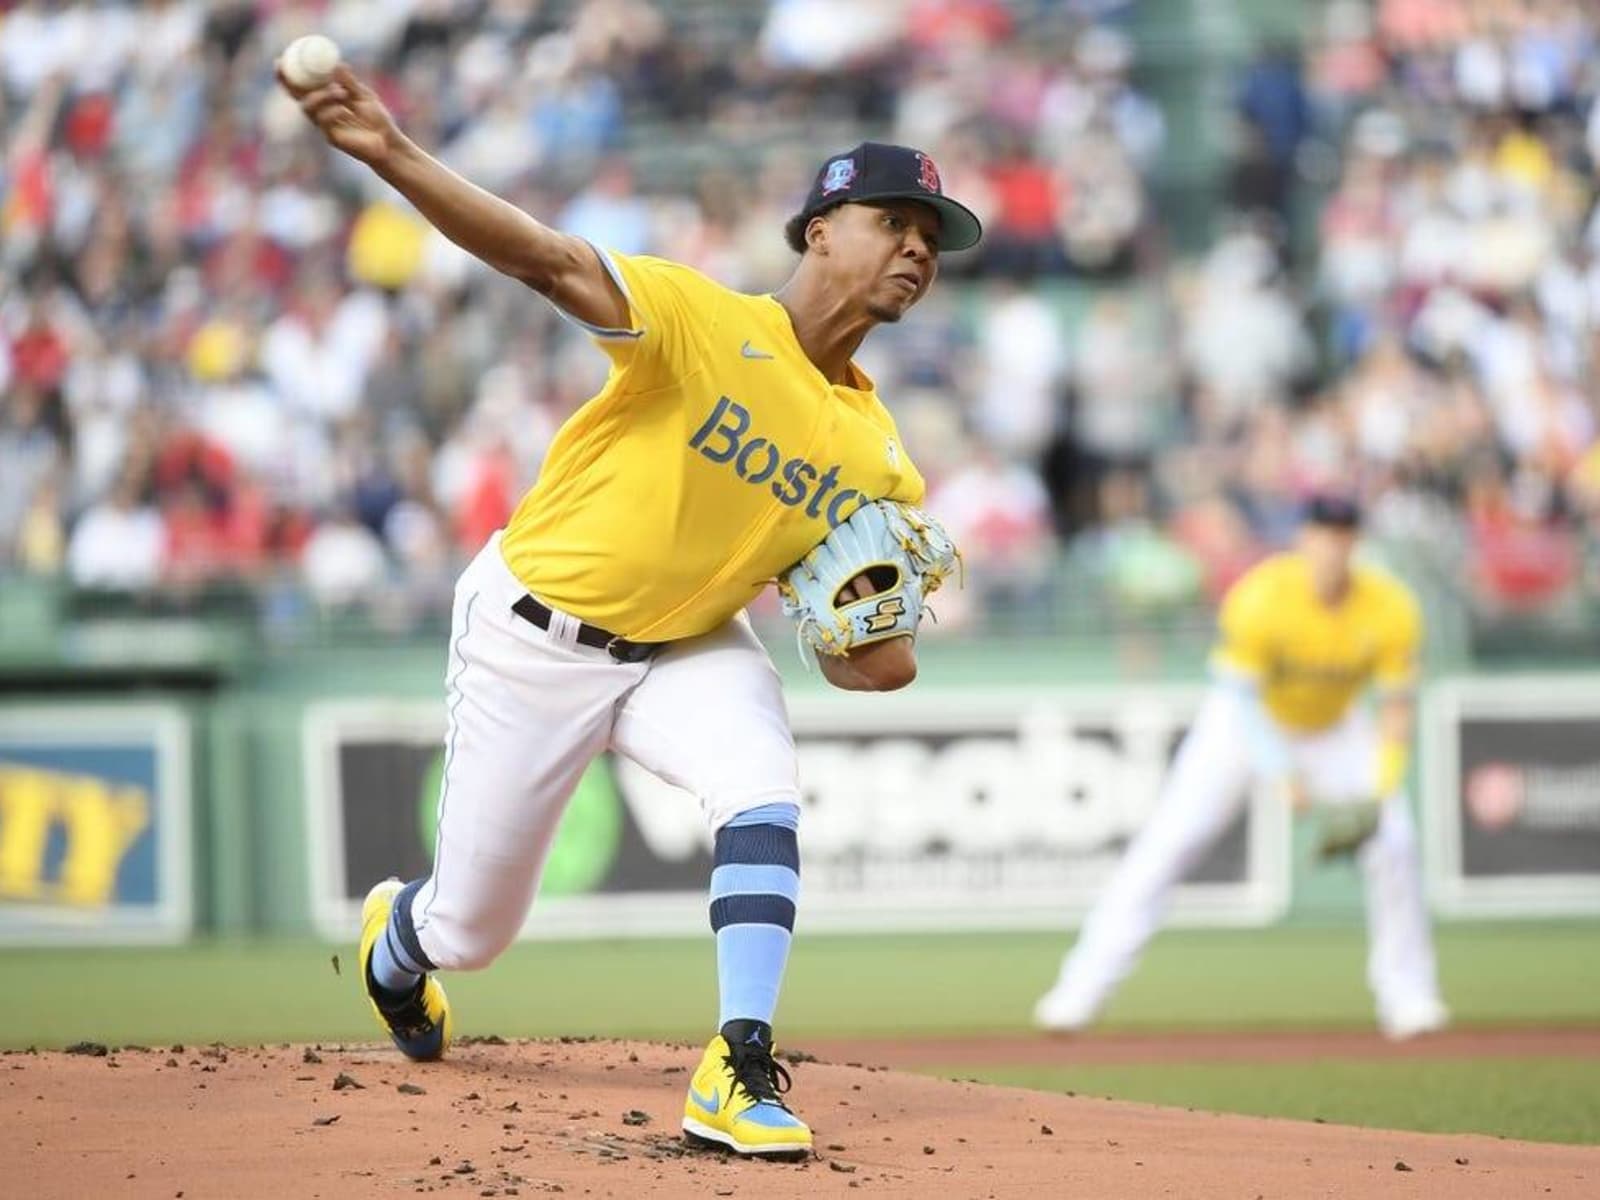 boston red sox wearing yellow and blue